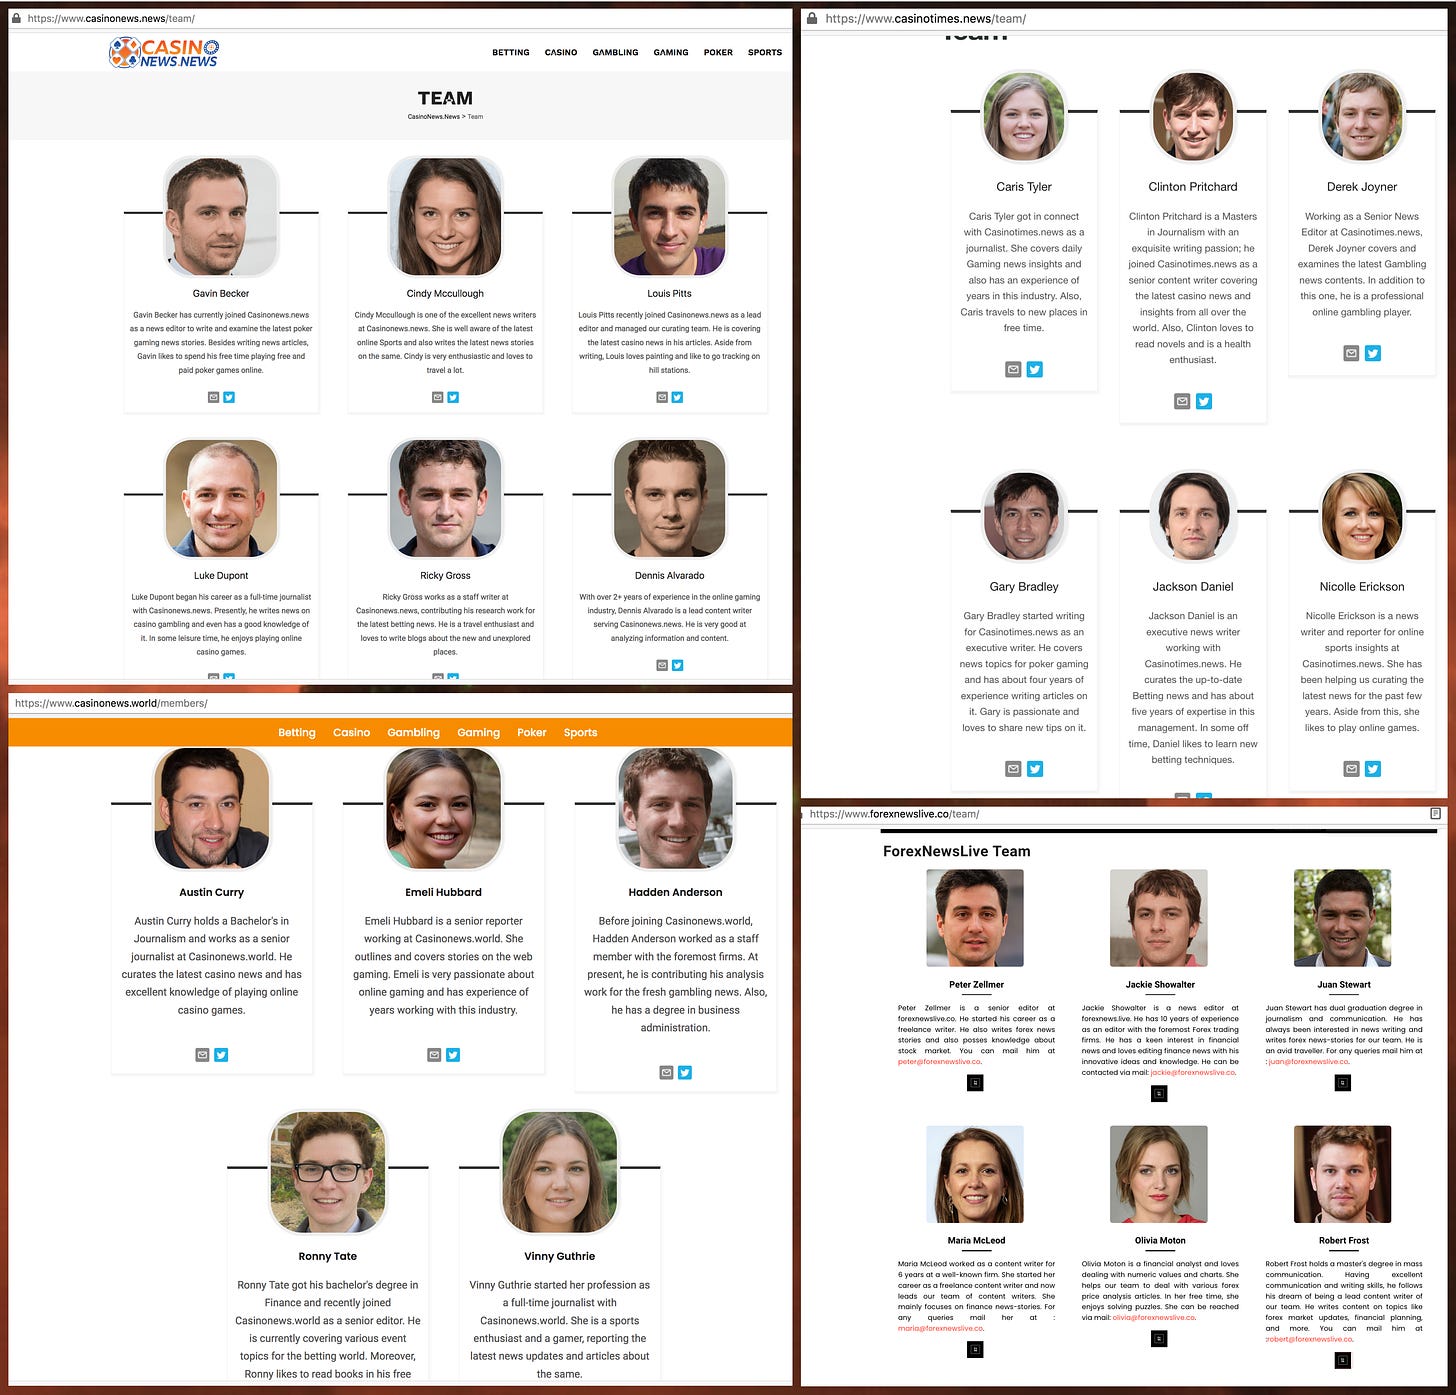 screenshots from 2021 of the author pages from casinonews.news, casinonews.world, casinotimes.news, and forexlive.co.  All "authors" have GAN-generated faces